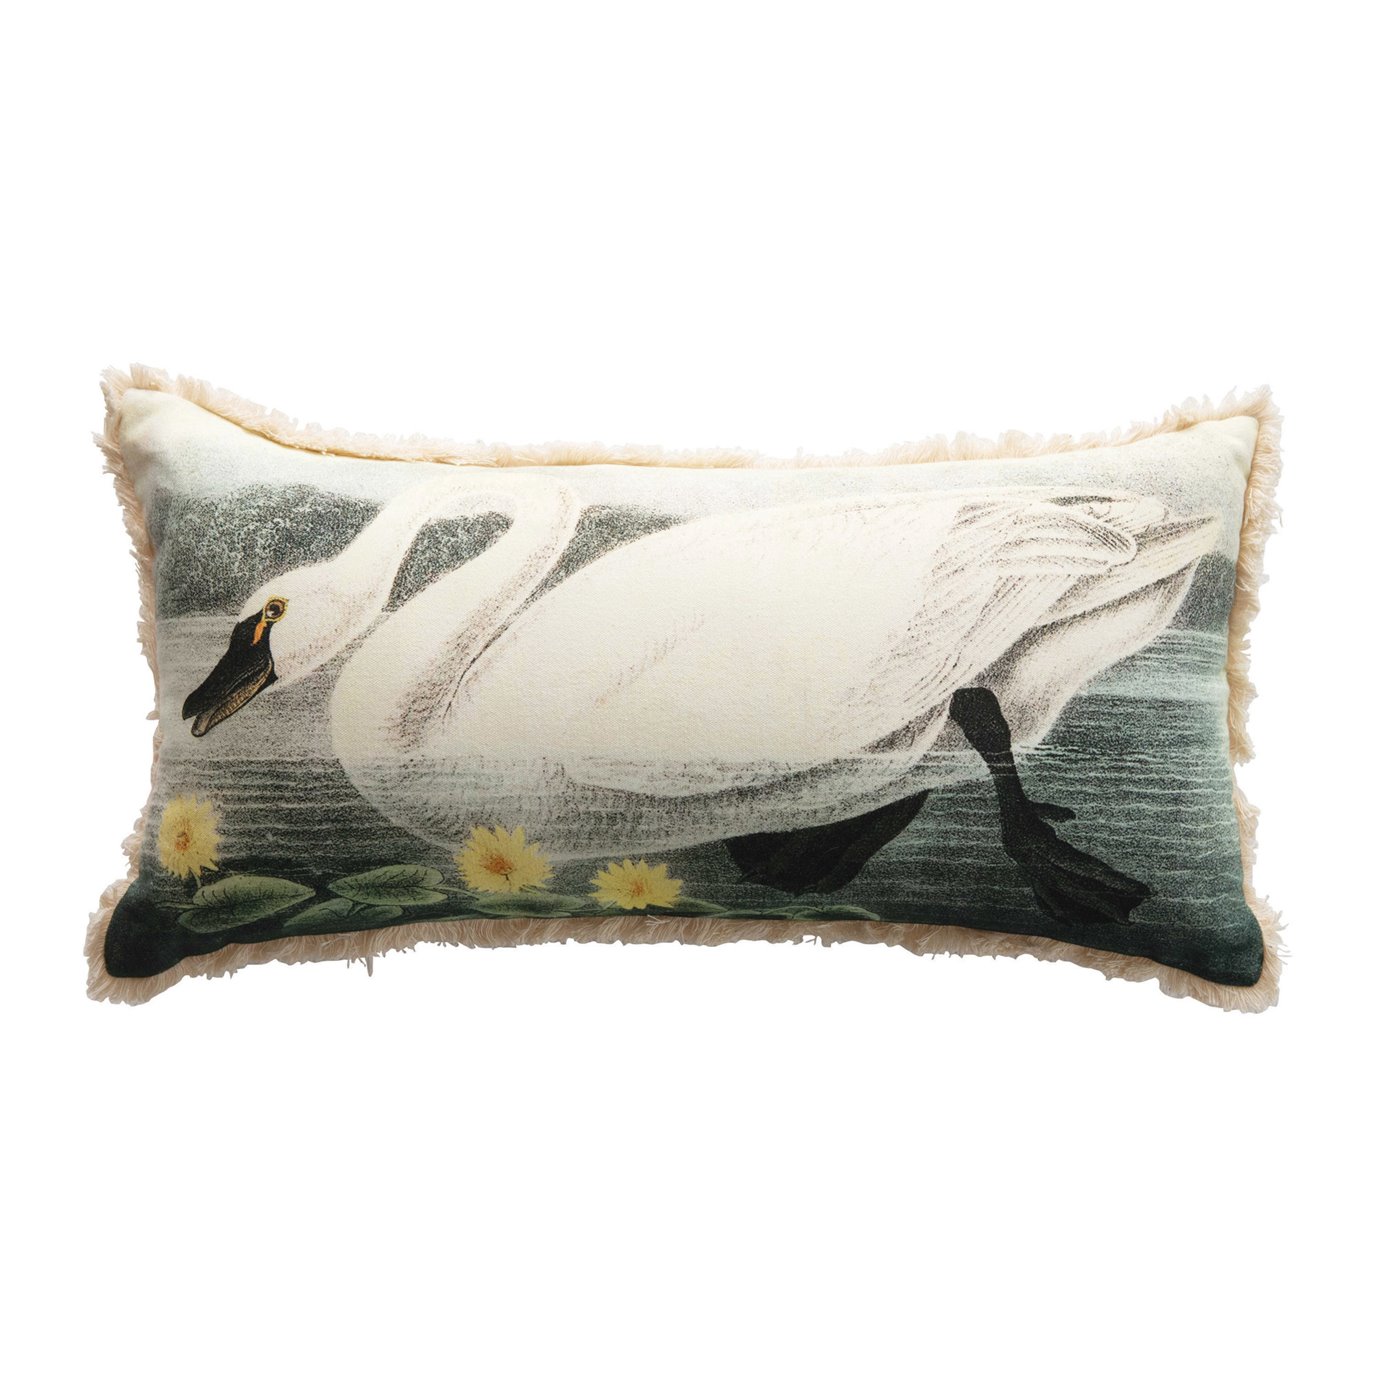 Cotton Lumbar Pillow with Vintage Reproduction Swan & Flowers Image, Multi Color